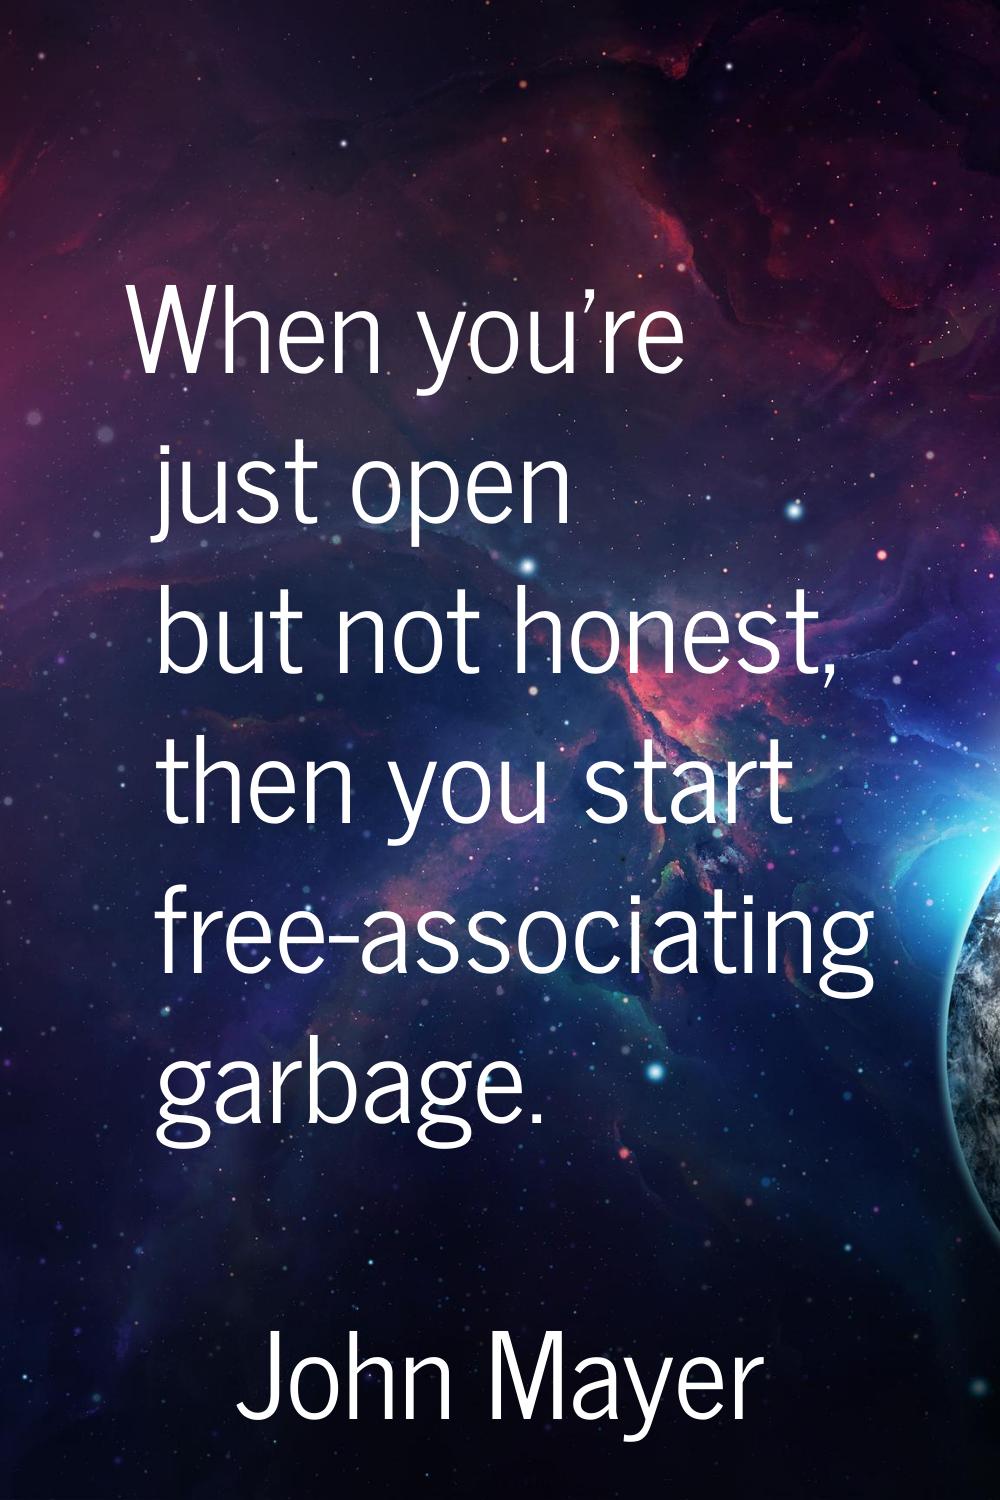 When you're just open but not honest, then you start free-associating garbage.